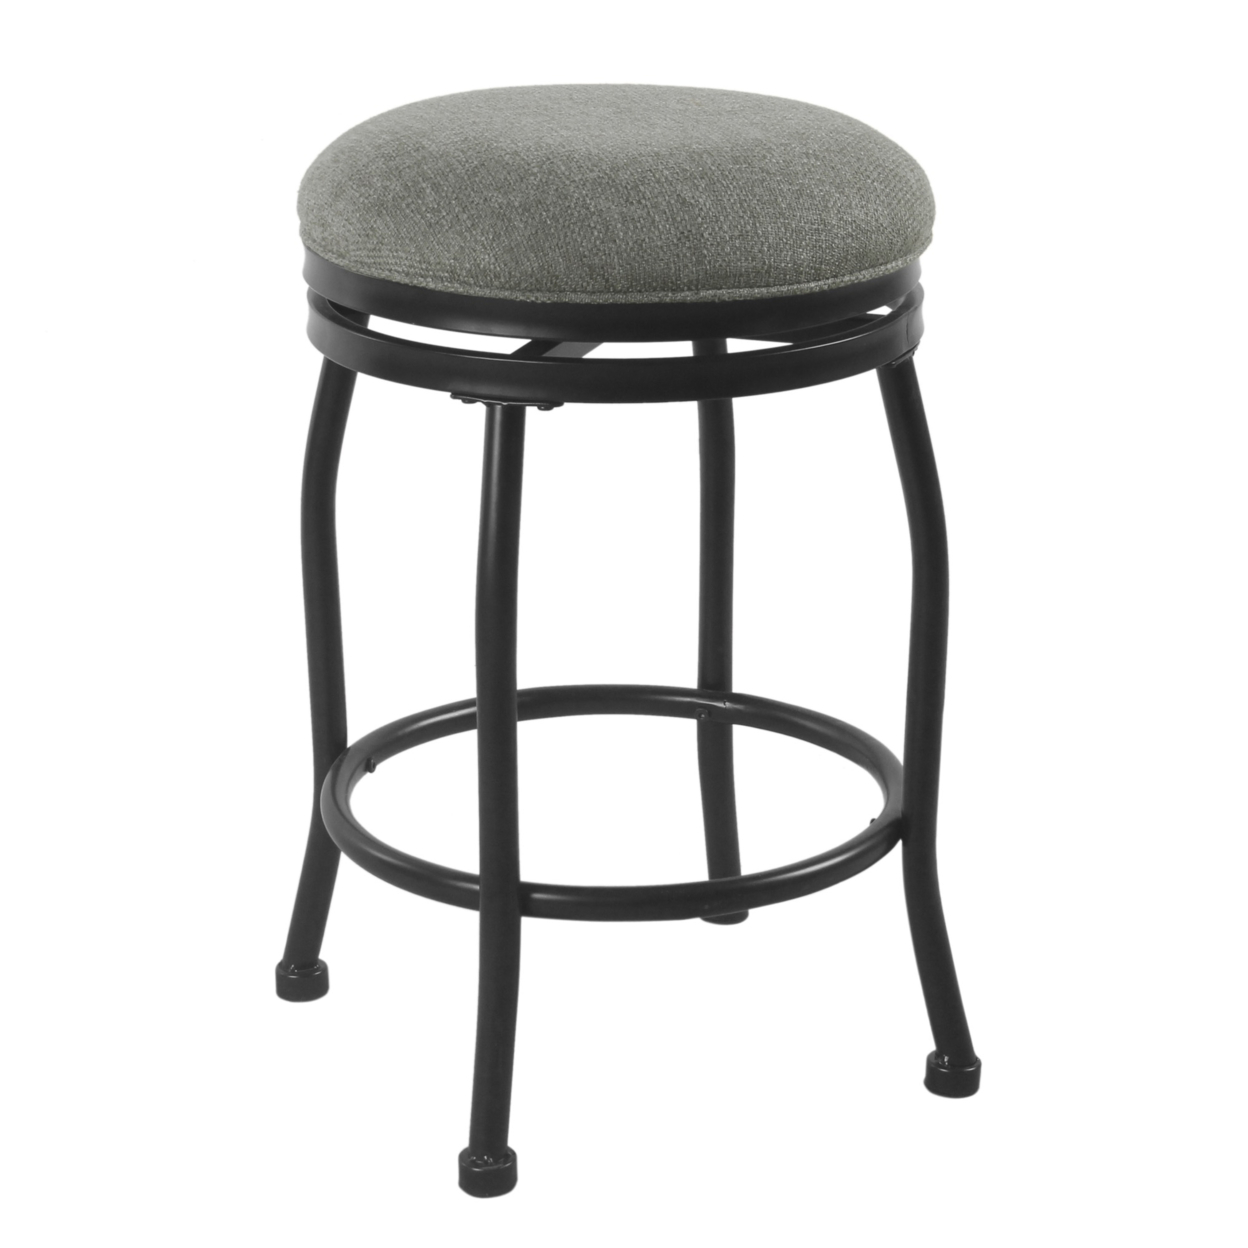 Metal Counter Stool With Swivelling Fabric Padded Seat, Gray And Black- Saltoro Sherpi